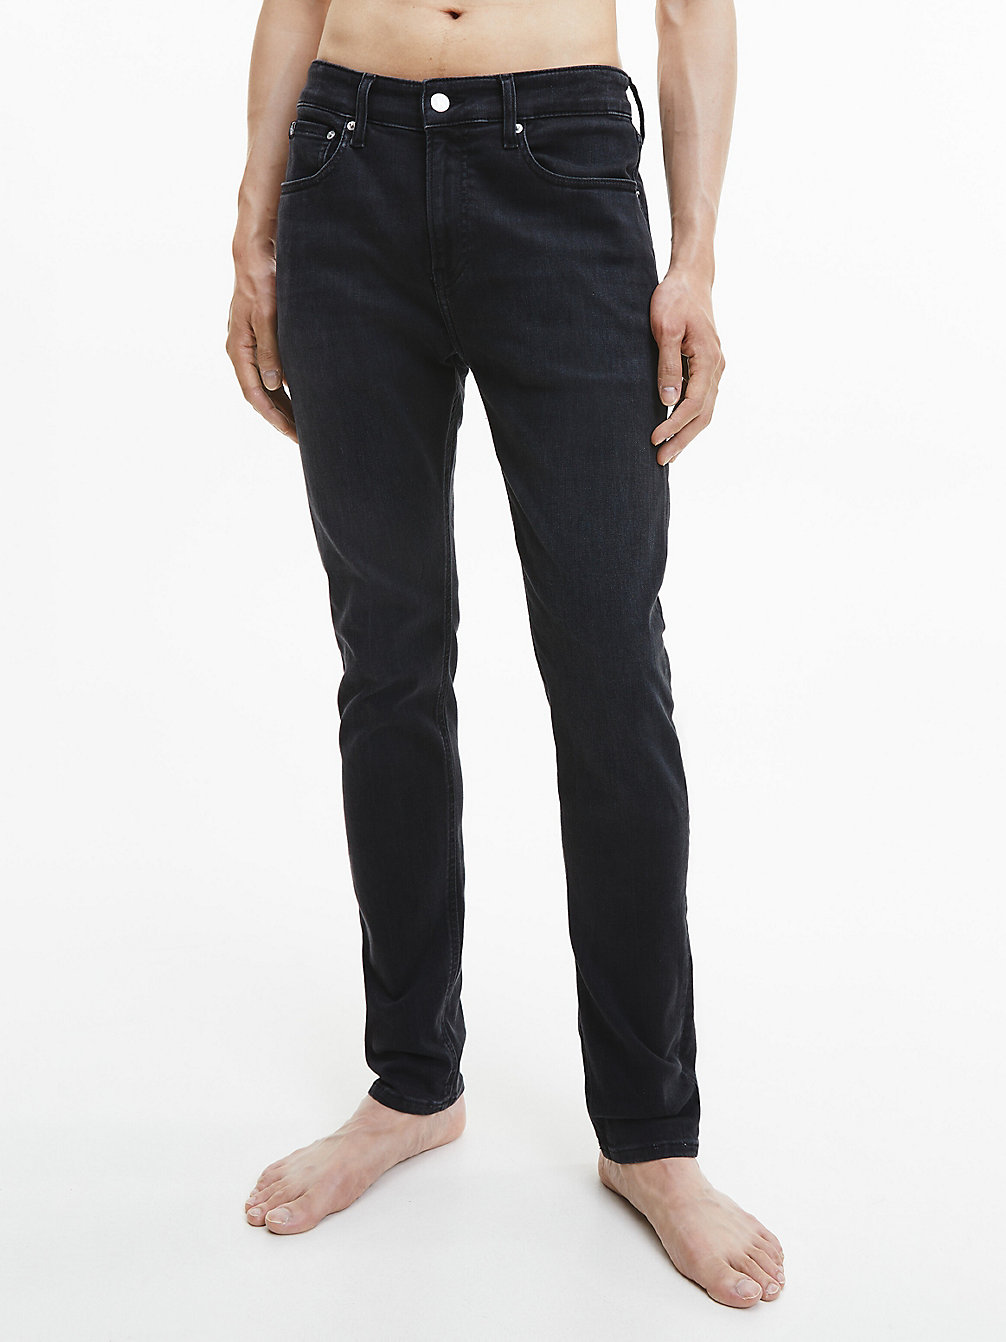 Wild Specialize Impossible Men's Jeans | Skinny, Slim-fit, Ripped & More | Calvin Klein®